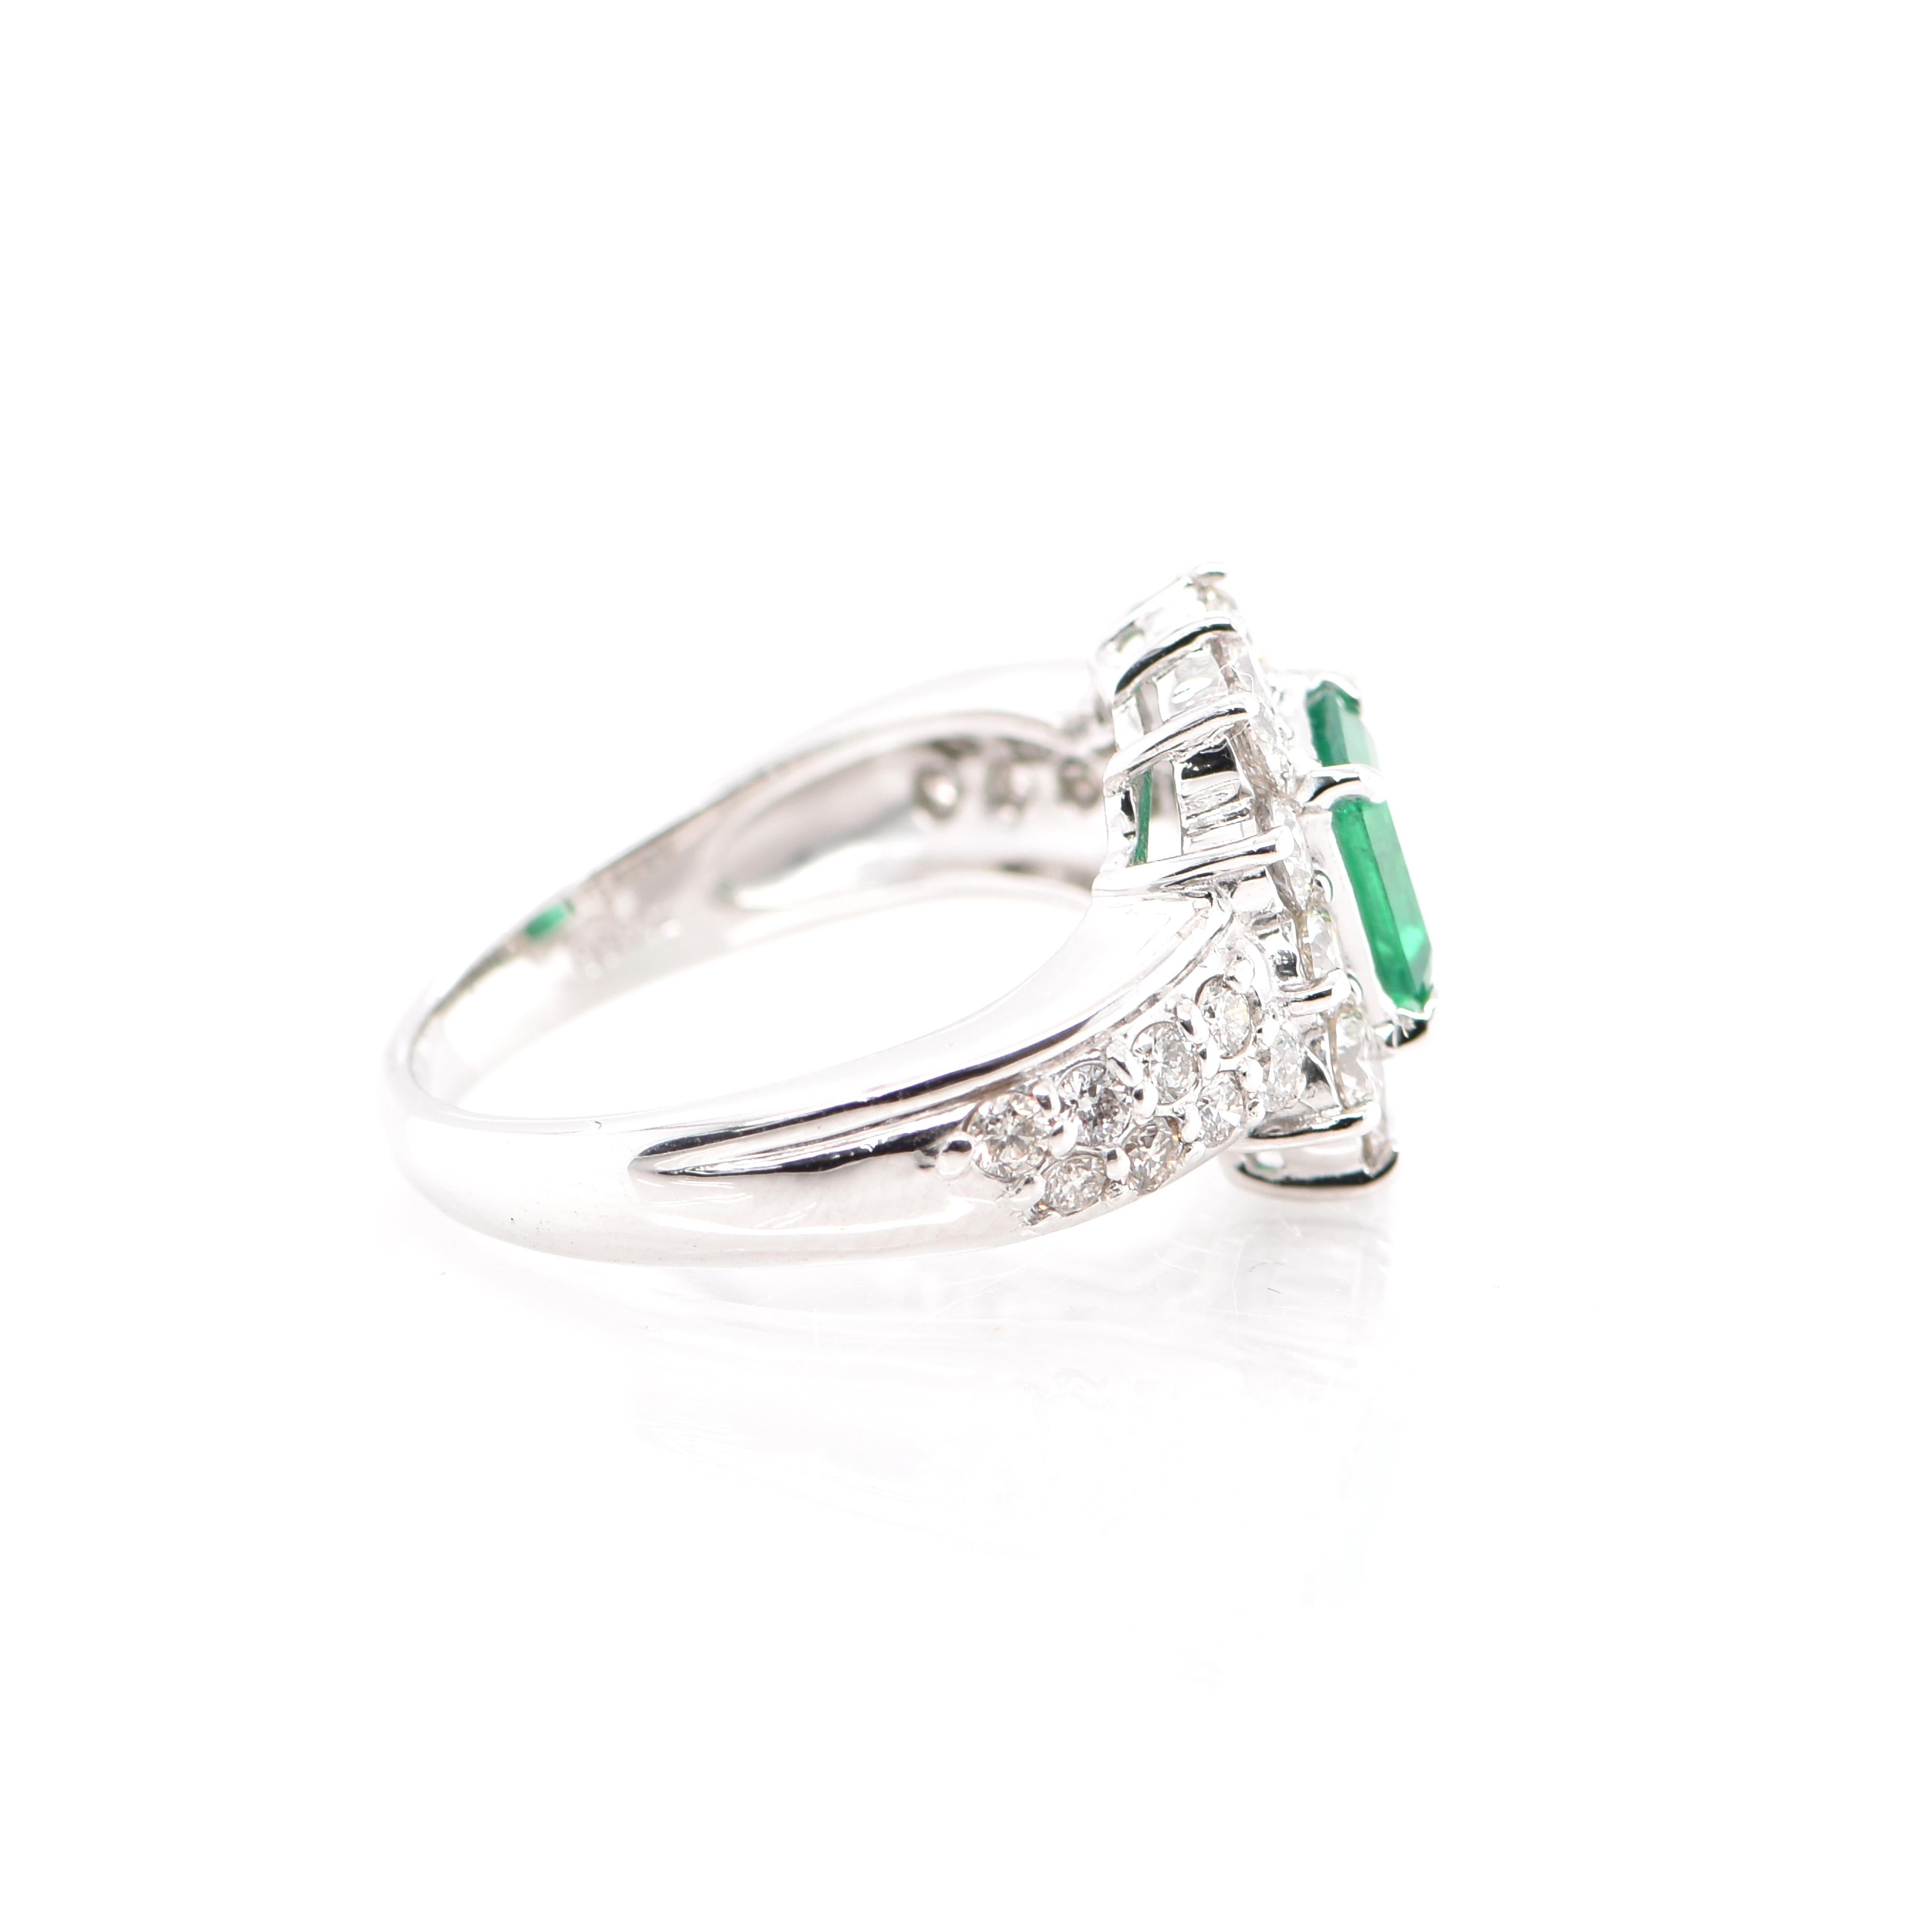 Women's 0.90 Carat Natural Vivid Green Emerald and Diamond Ring Set in Platinum For Sale